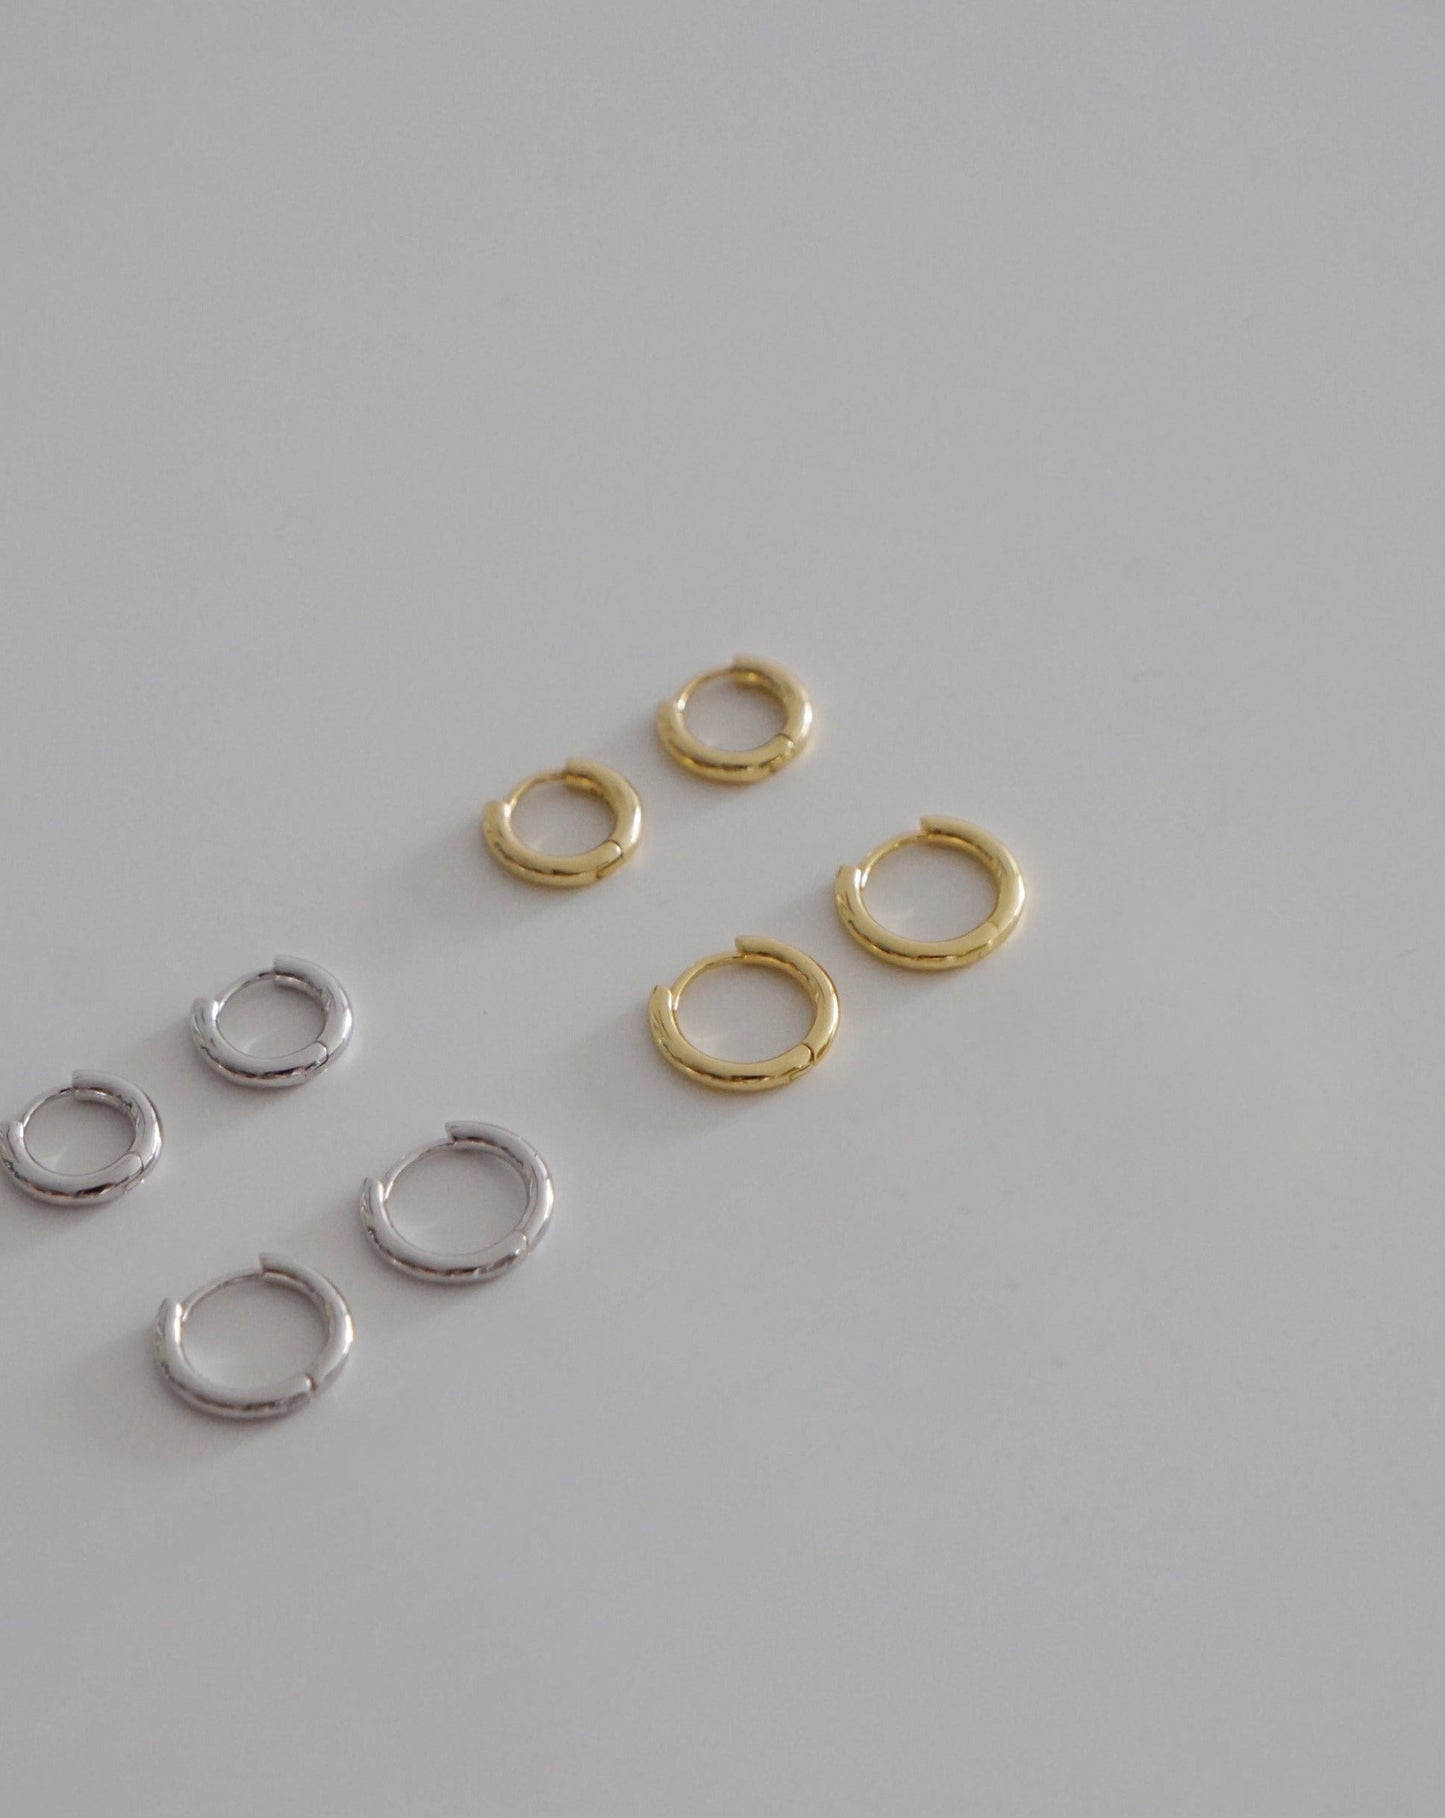 [Reject] Mini Hoops in Gold